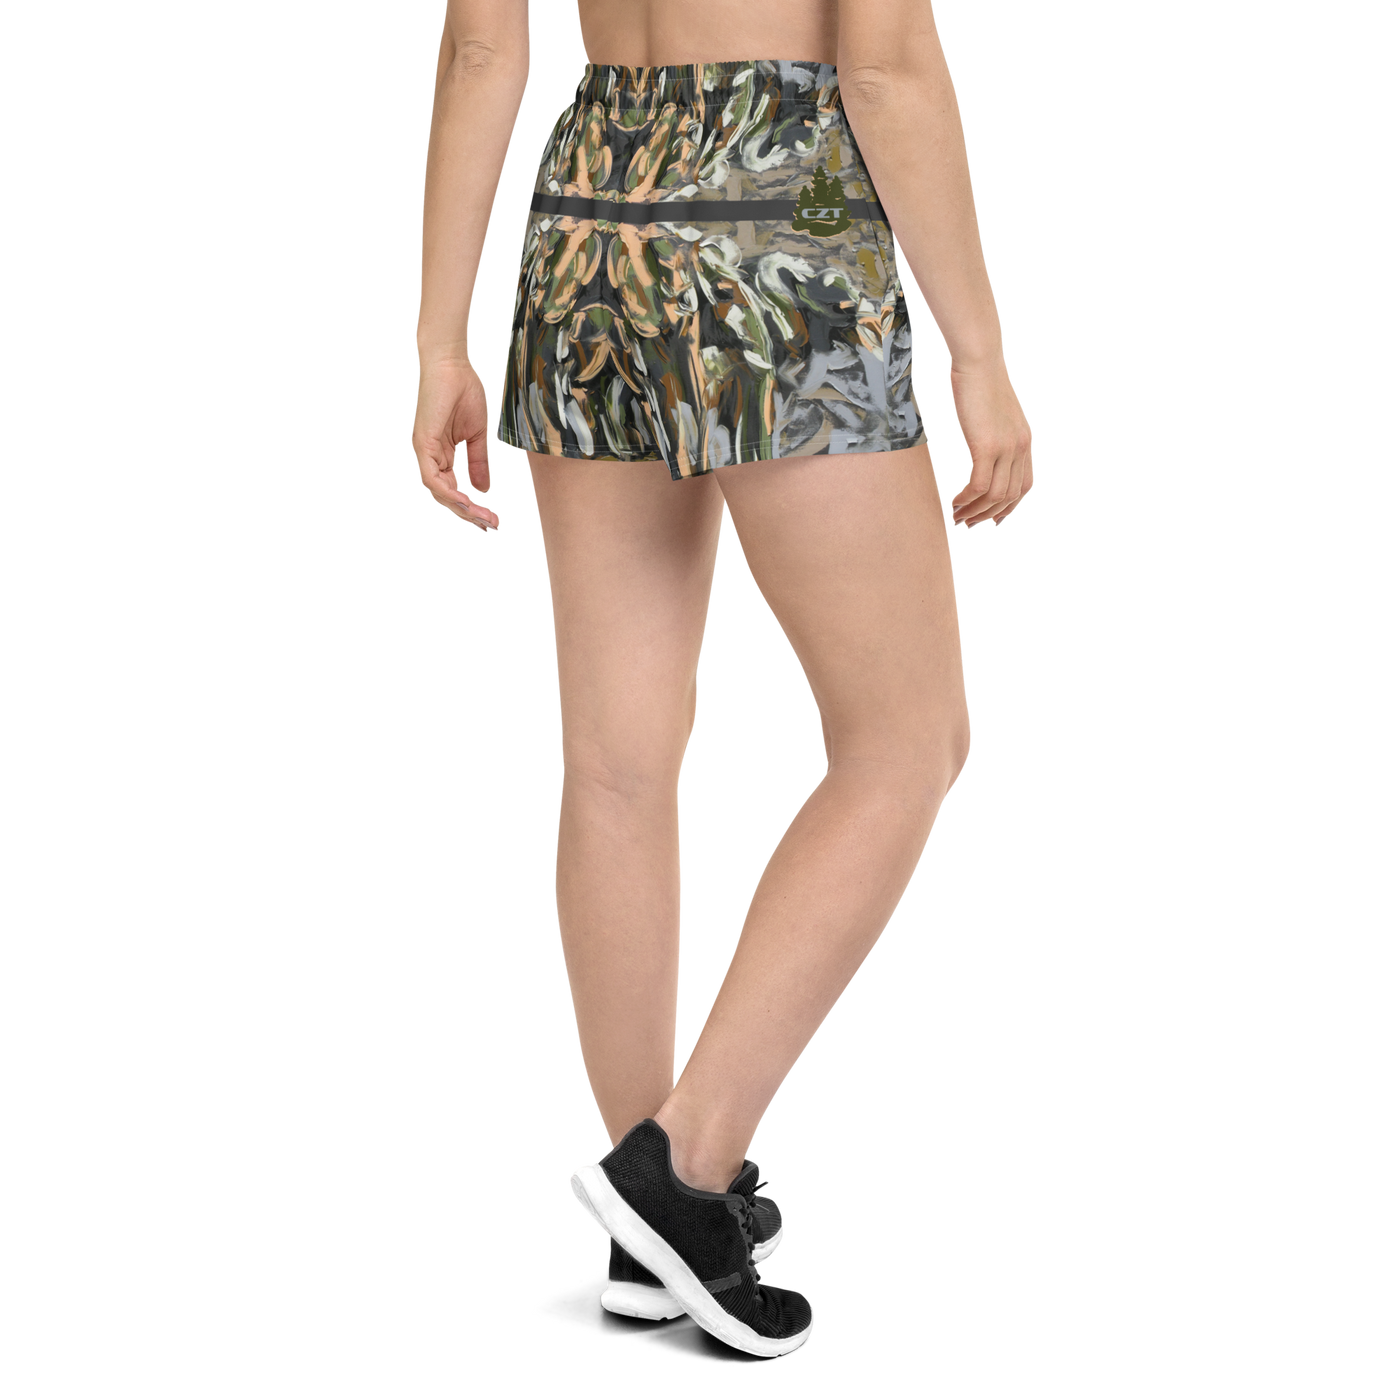 CZT x KP - ELEPHANTS By The WATER - Women’s Shorts (Recycled)